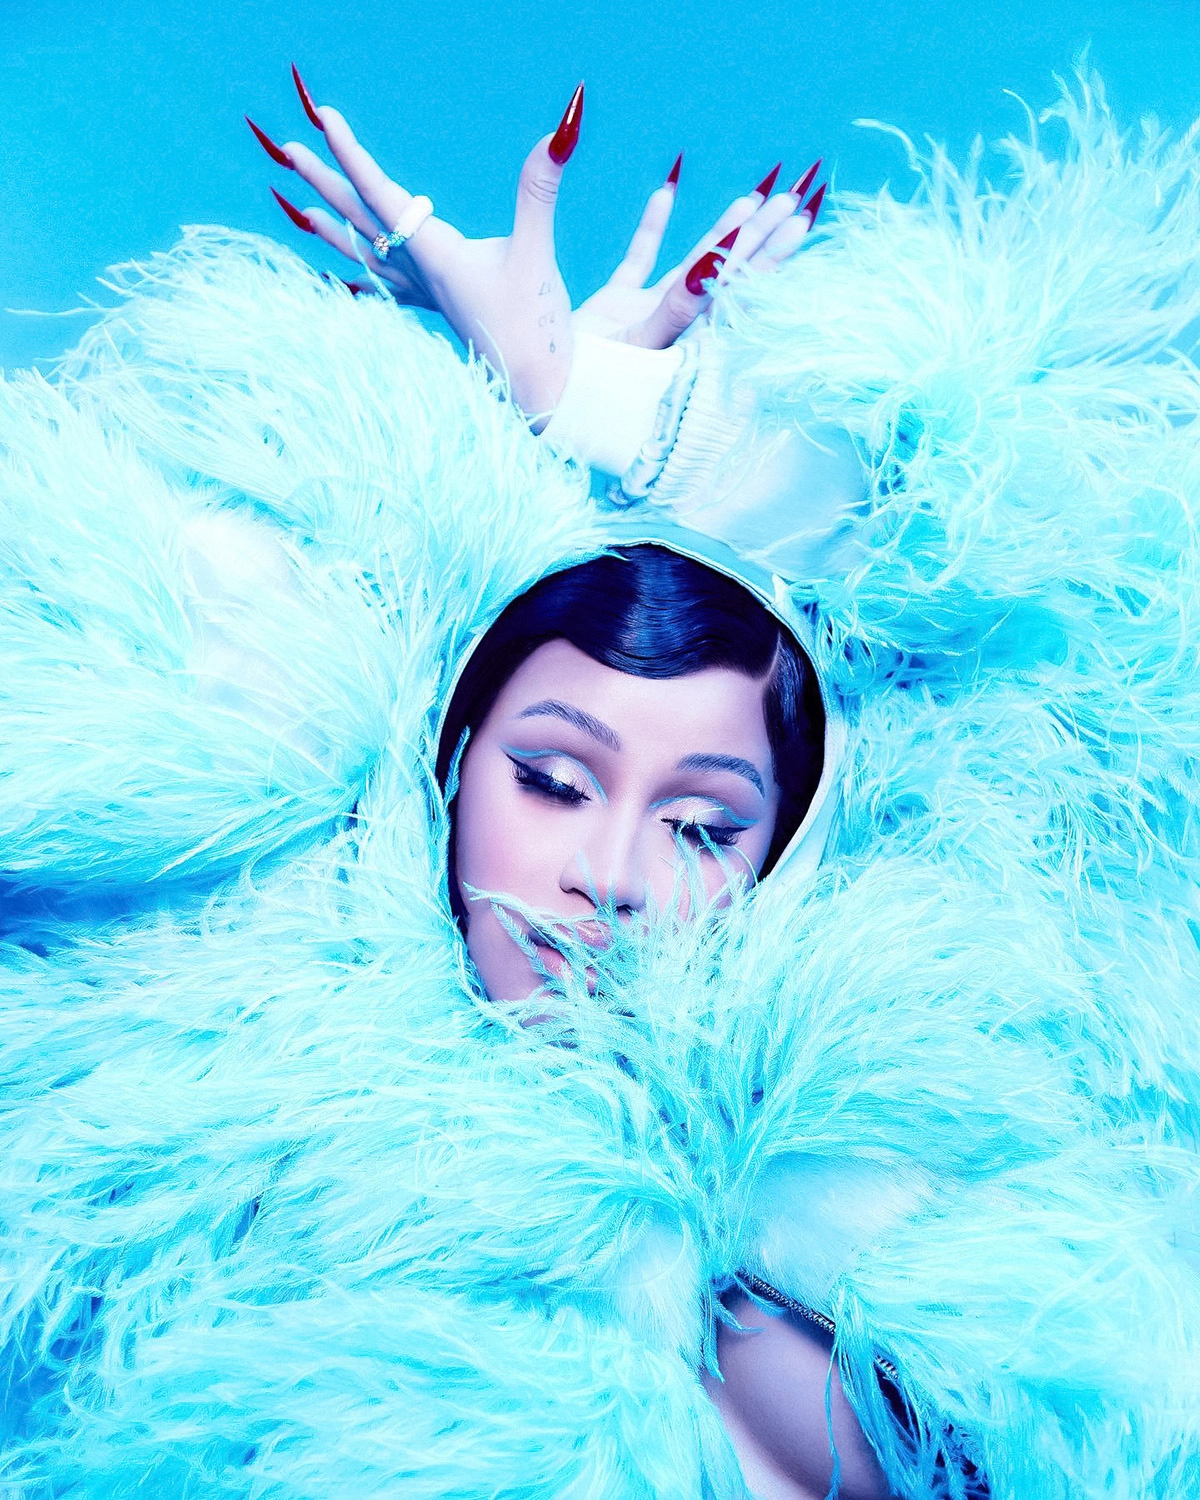 Cardi B covers Vogue Singapore July August 2022 by Lea Colombo